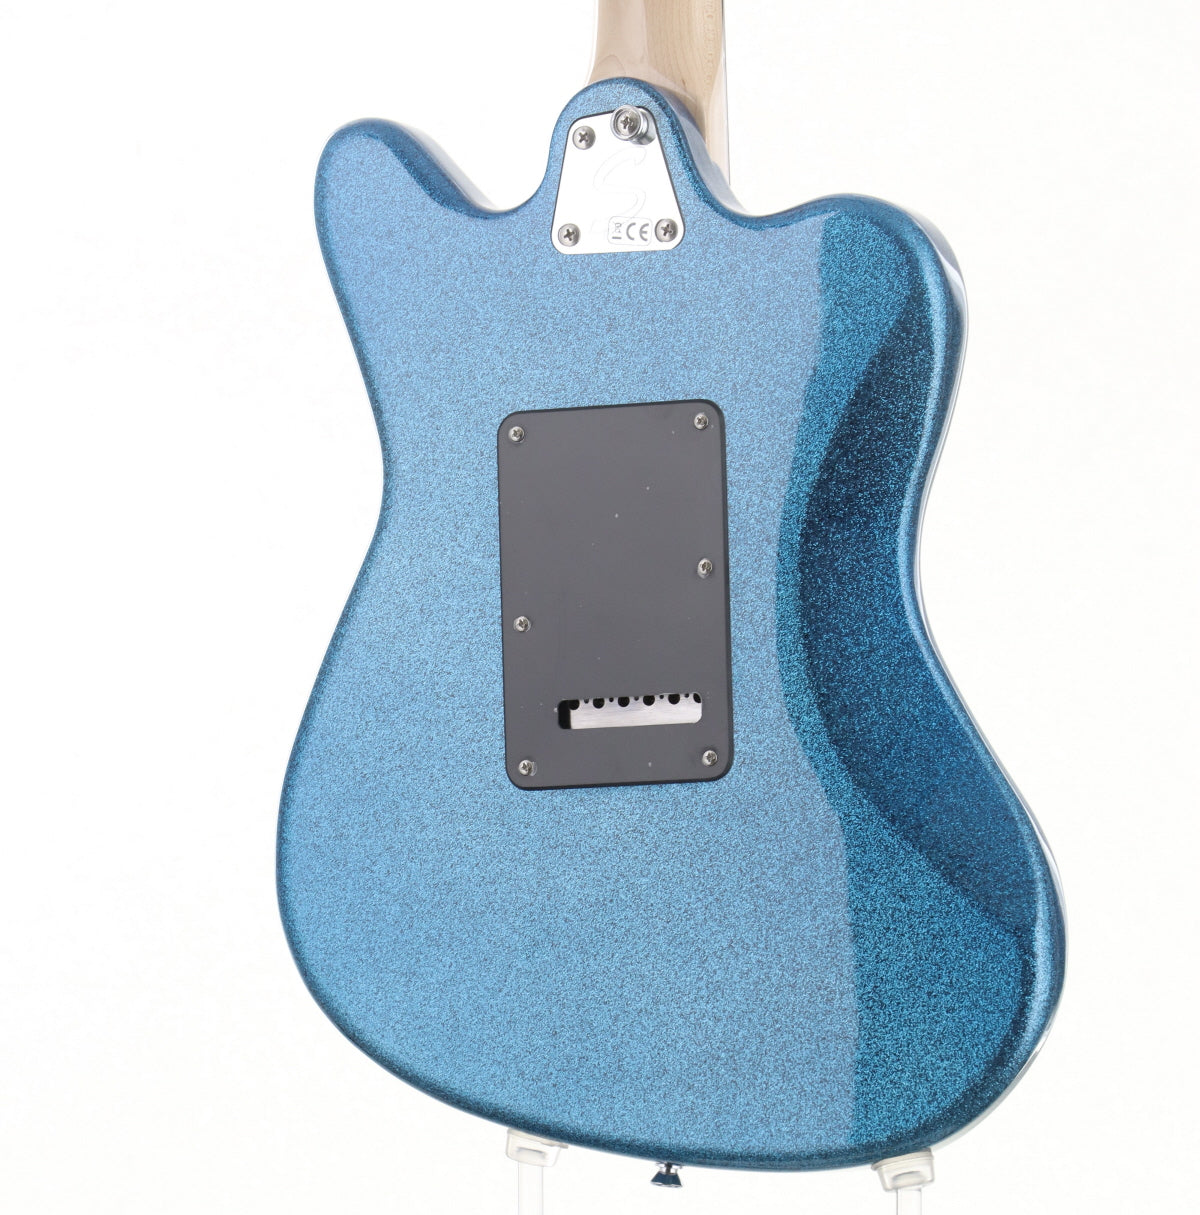 [SN CYK121000972] USED SQUIER / Paranormal Super-Sonic Blue Sparkle [03]